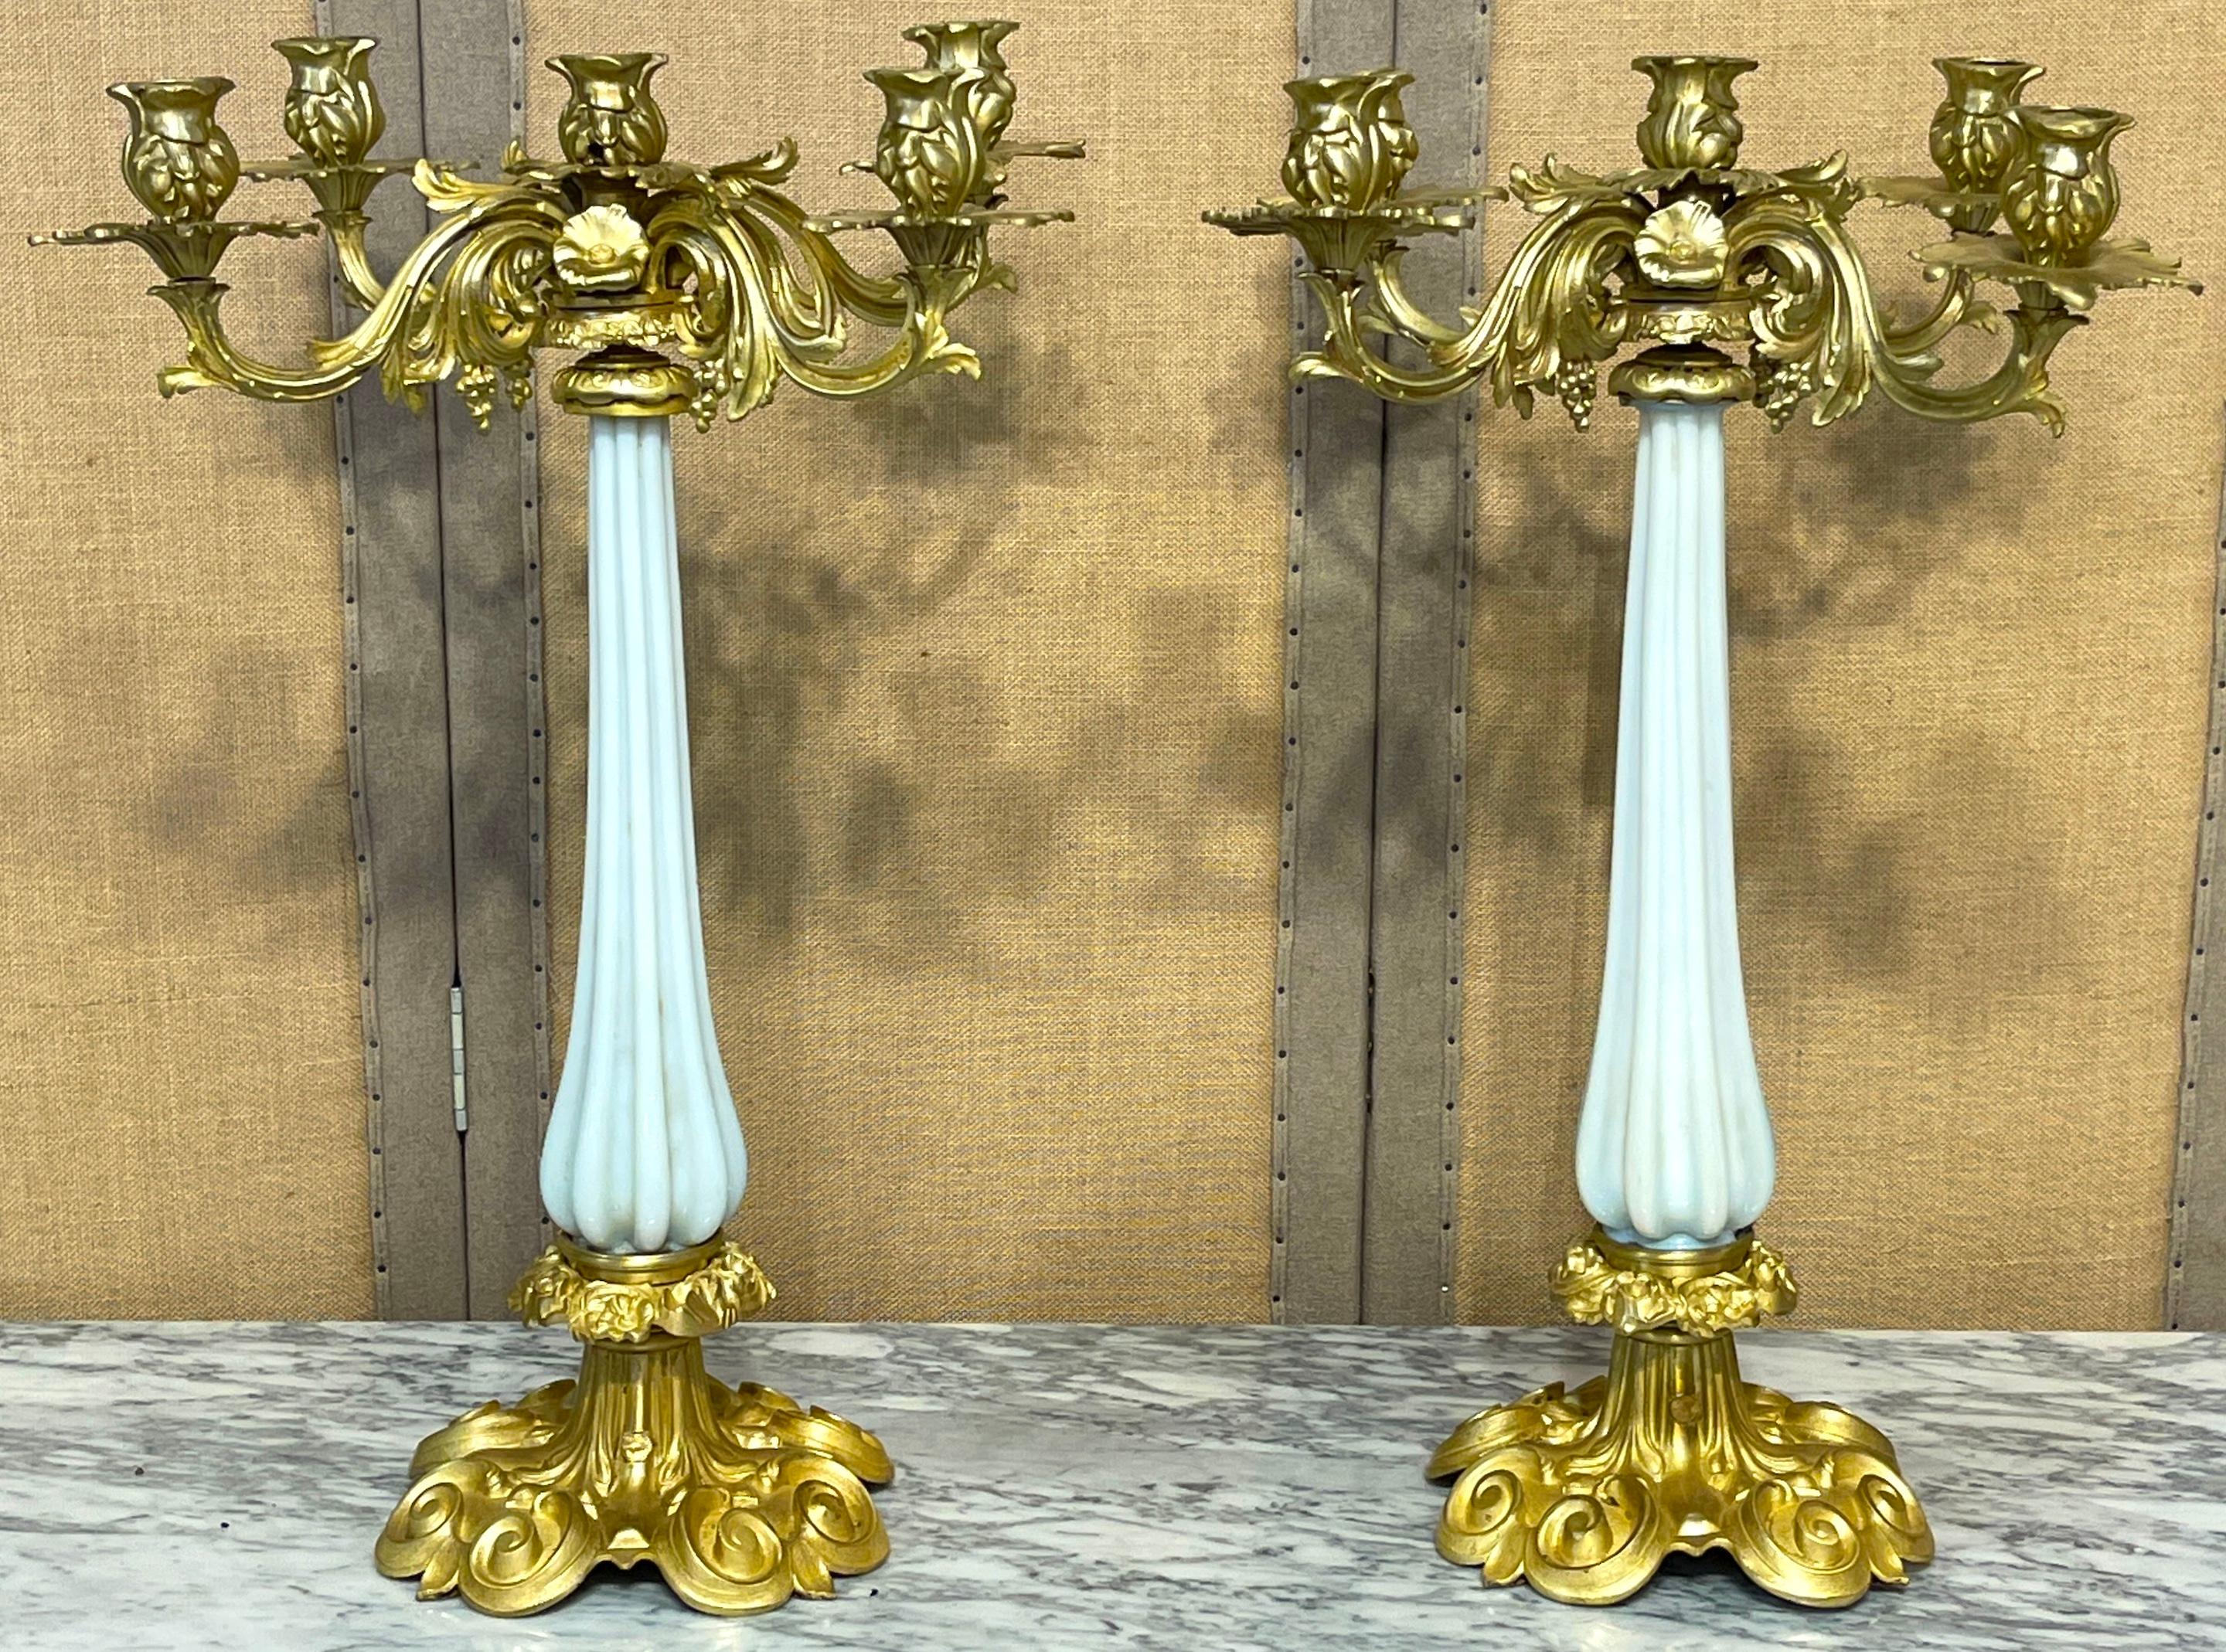 Pair of 19th-century French Ormolu and Opaline Palais Royal Candelabra, circa 1865 
France, 19th century 

A rare find, this matched pair of 19th-century French candelabra is a captivating blend of French elegance and opulence. The elegance of the